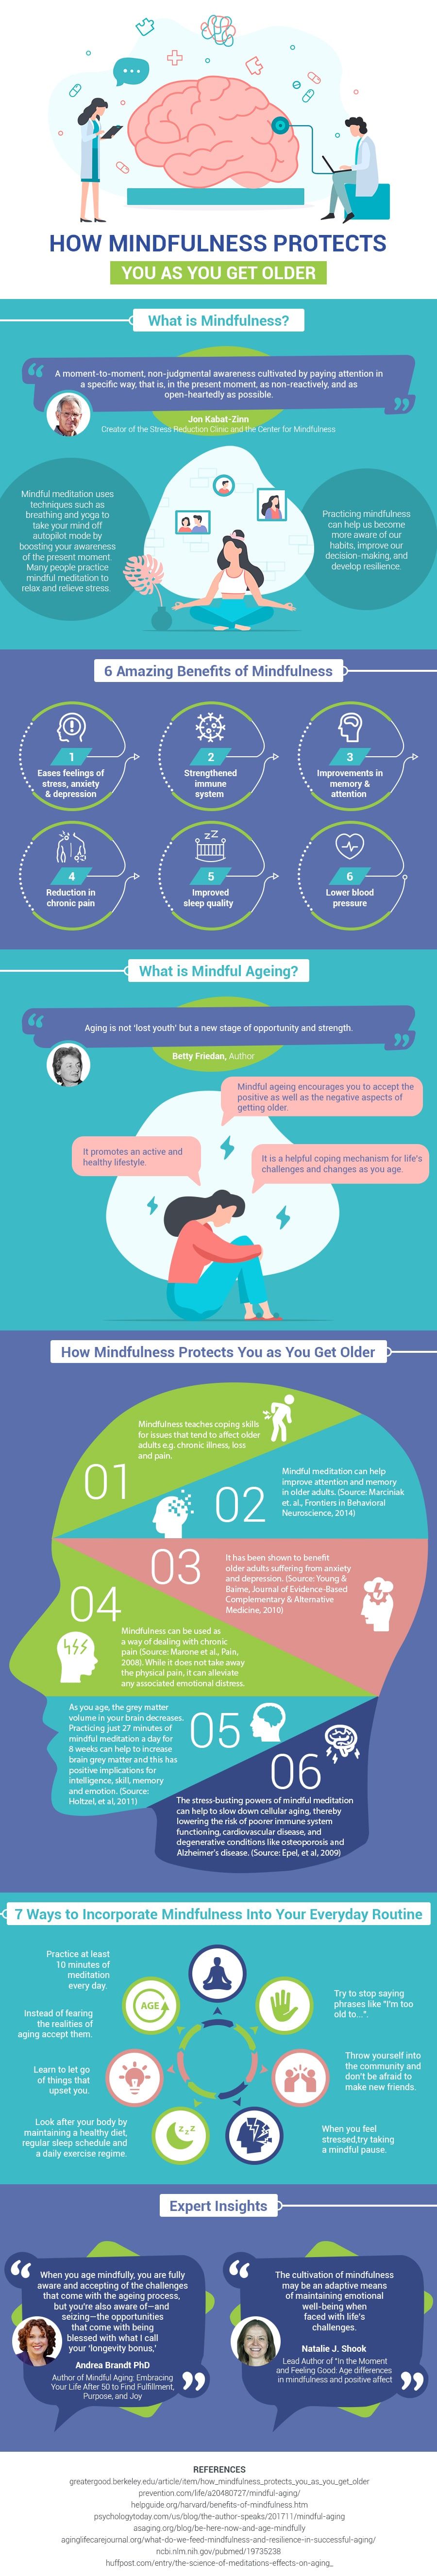 Mindfulness supports you as you age.